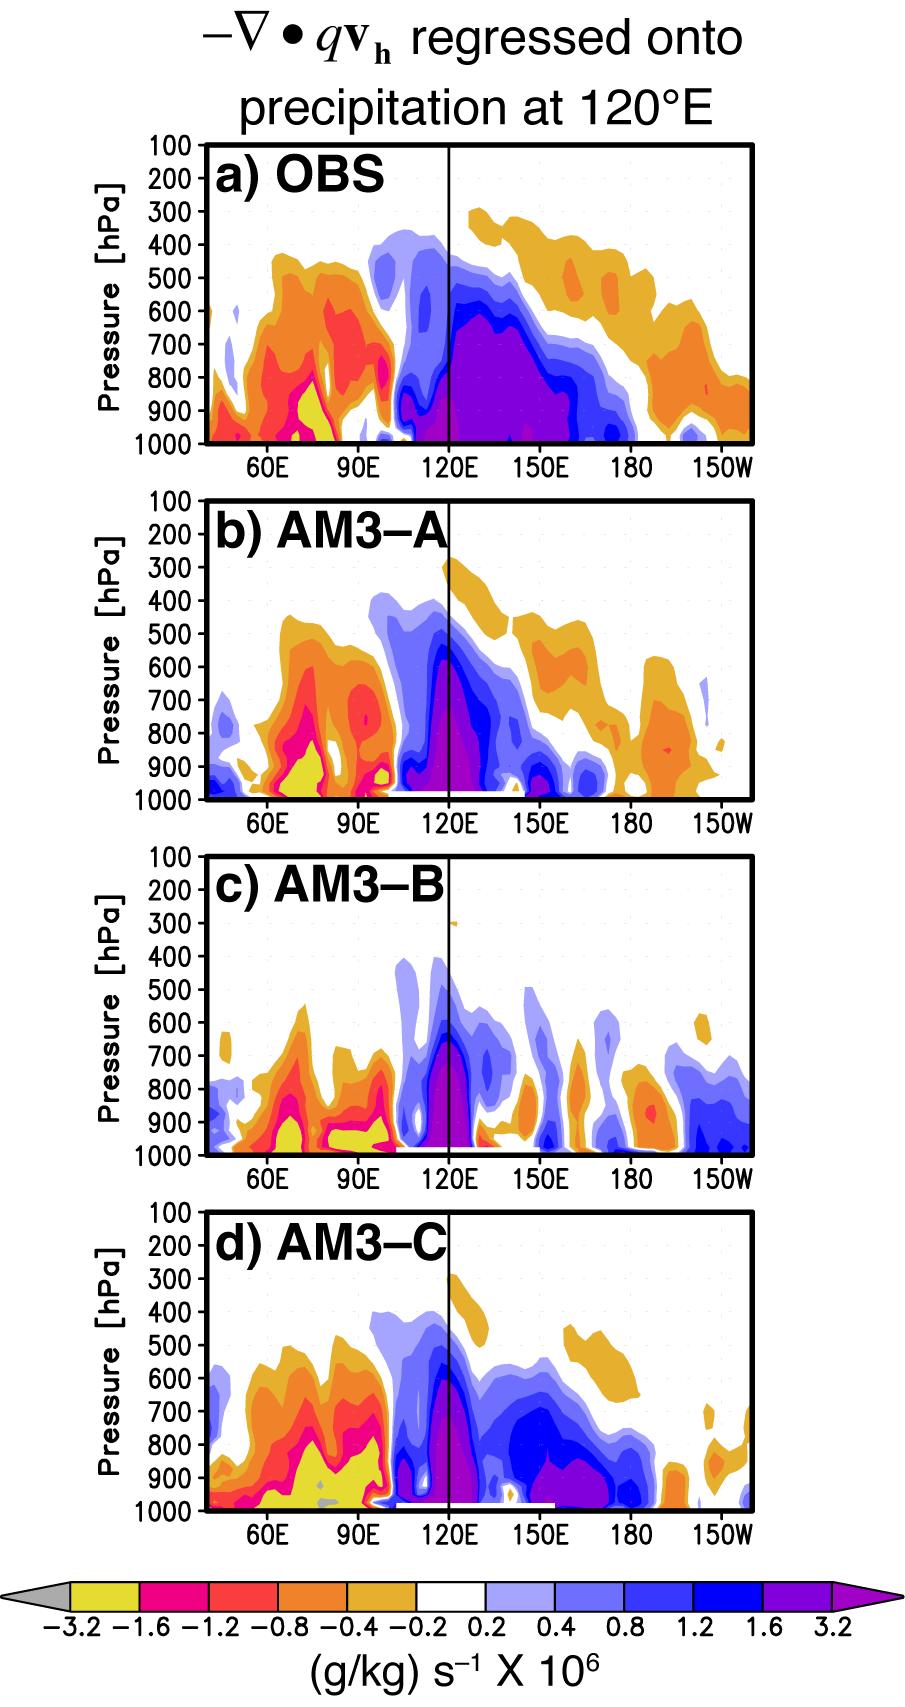 1102 1103 1104 1105 1106 1107 Figure 14. As in Fig. 10, but for anomalous moisture convergence linearly regressed onto 20-100-day filtered precipitation at 120 E.